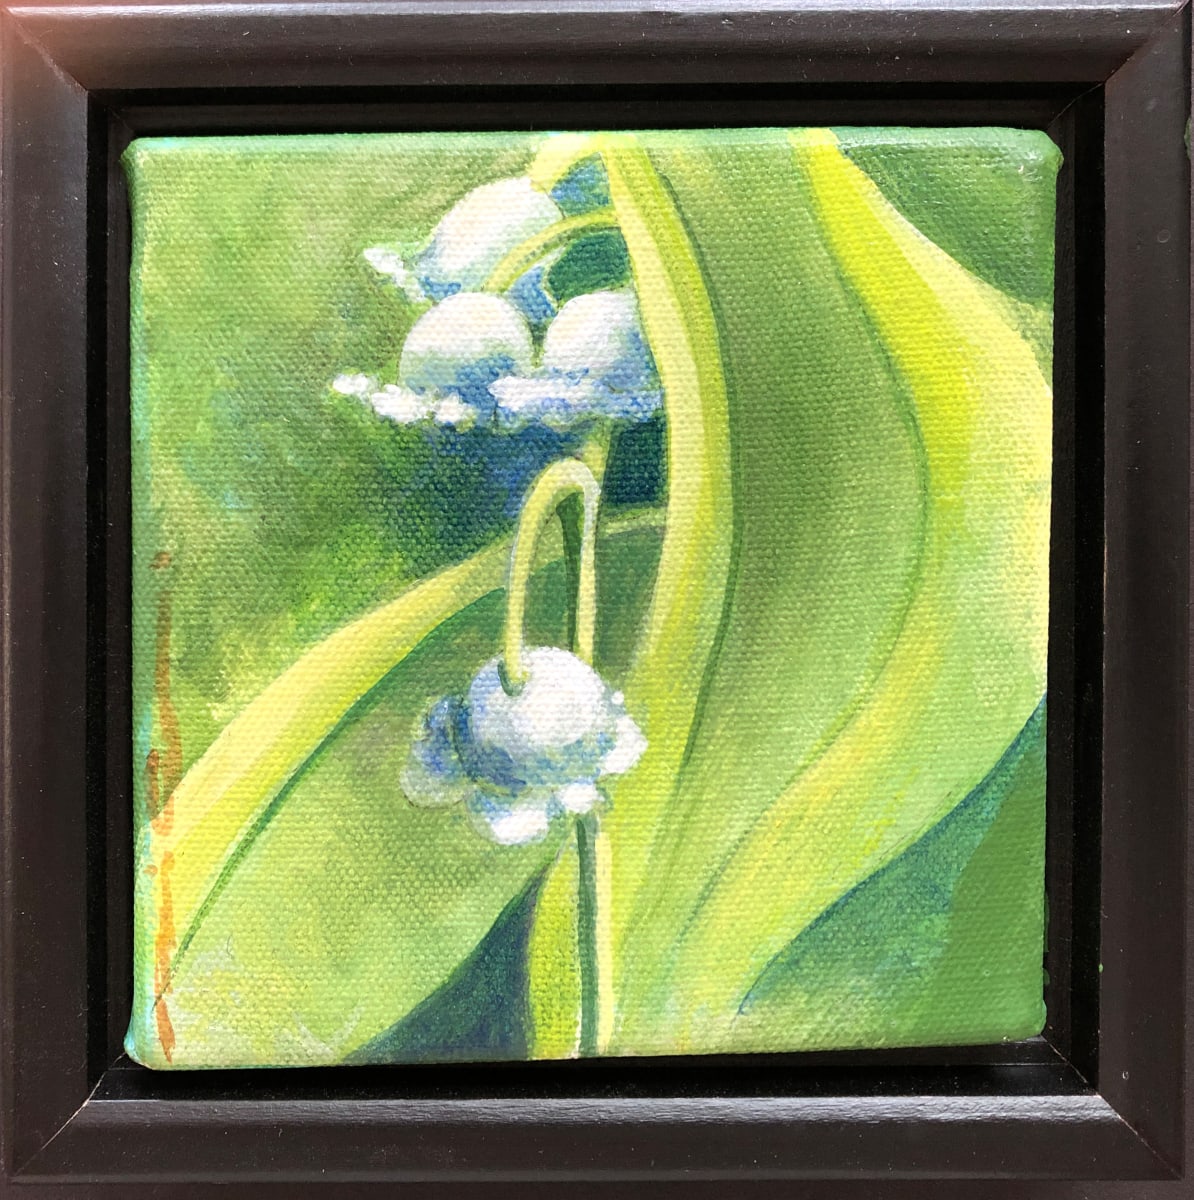 Lily Of the Valley 2 by Karen Phillips~Curran  Image: Lily of the Valley 2